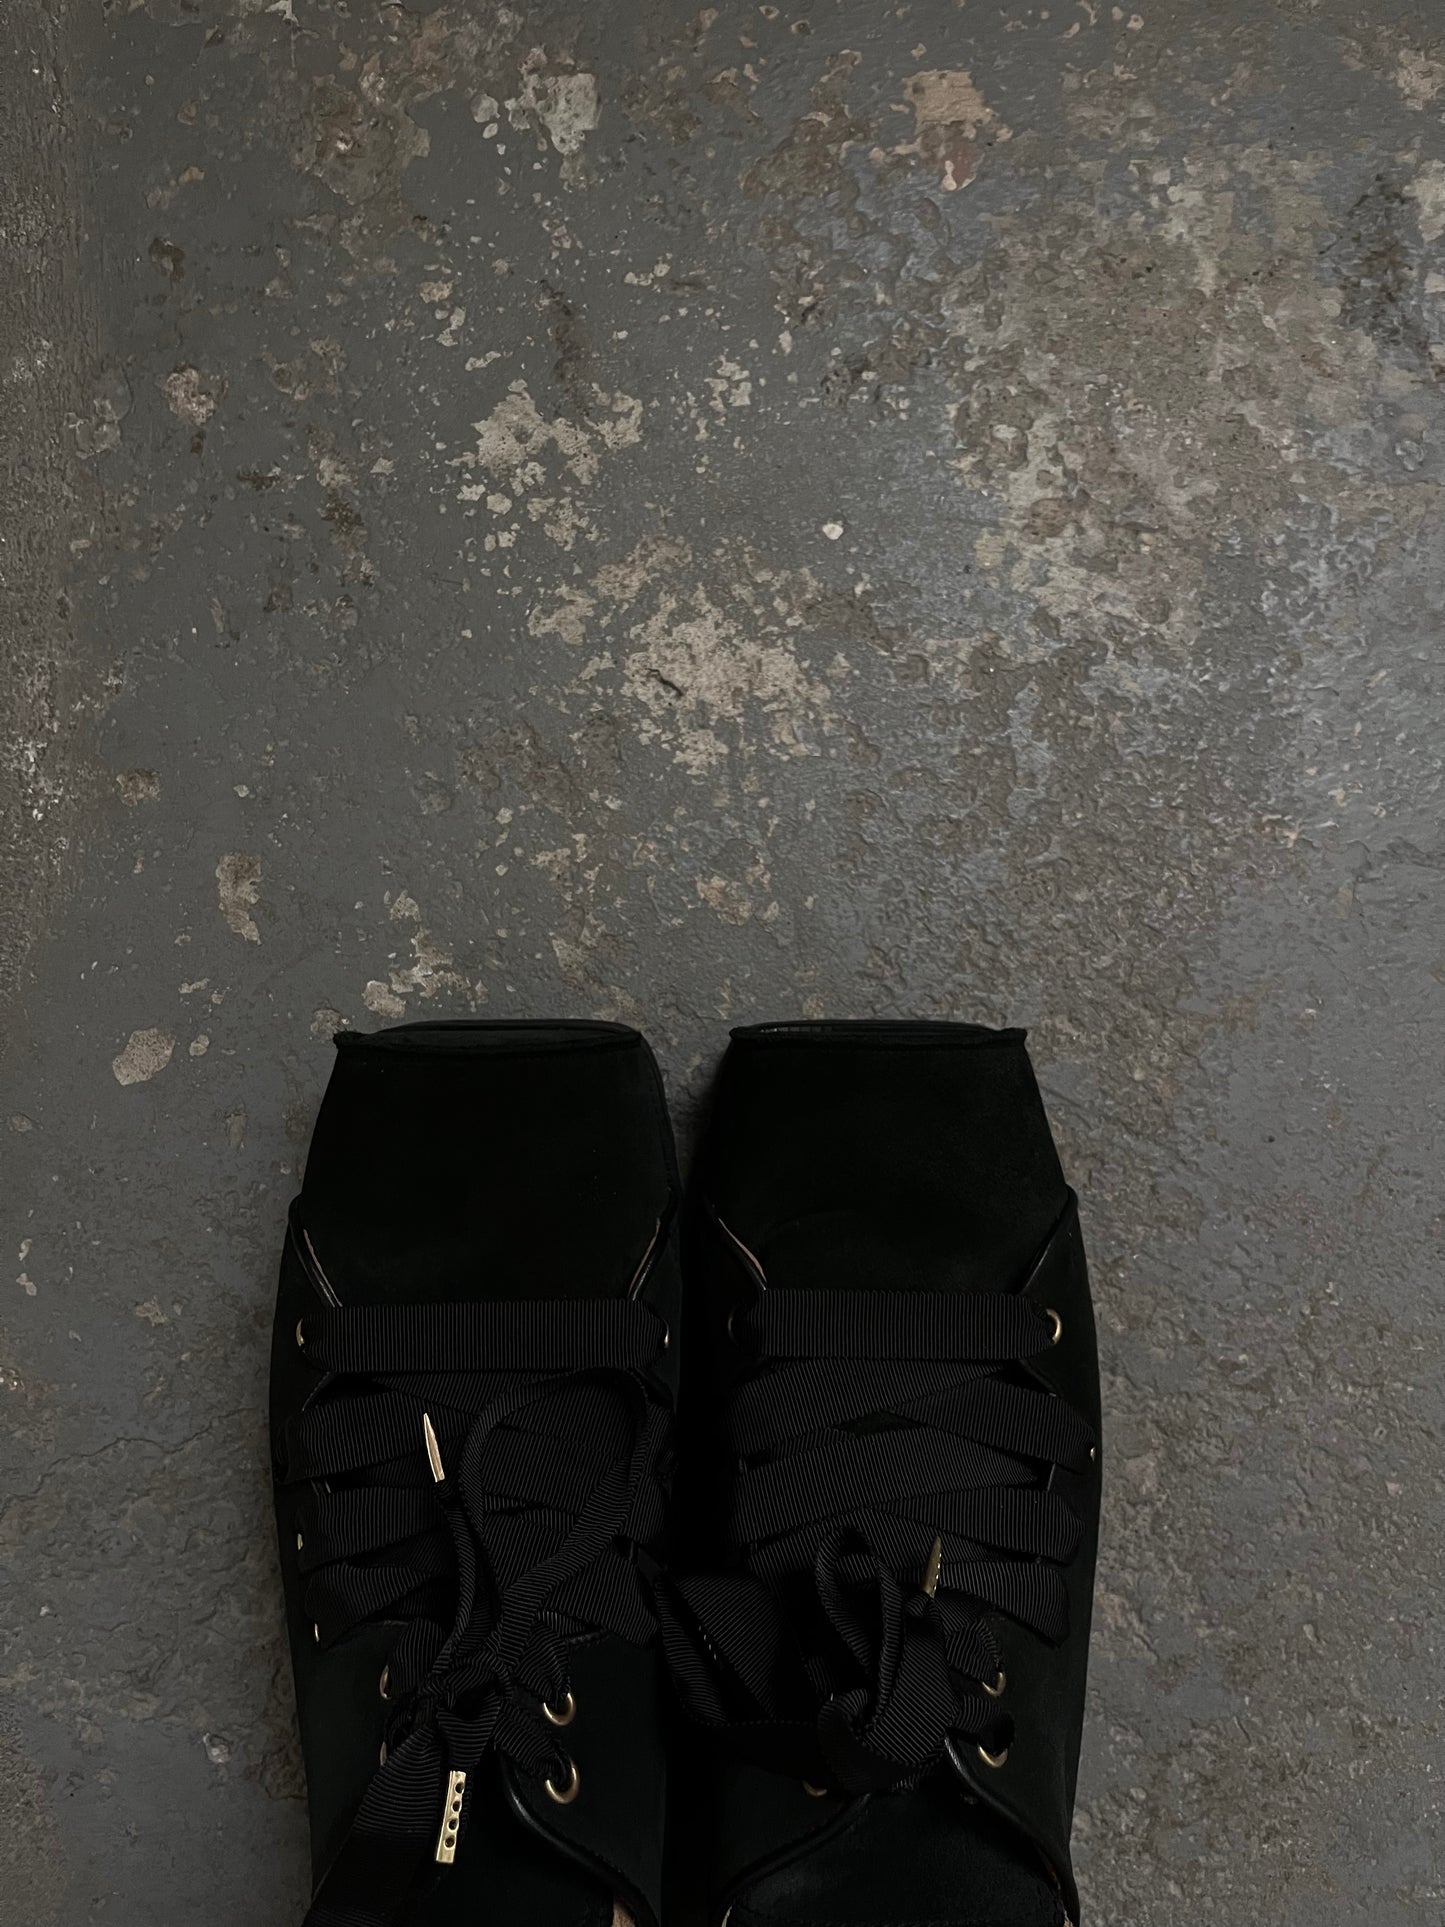 The Old Curiosity Shop X Kids Love Gaite Suede Hog Toe Creepers